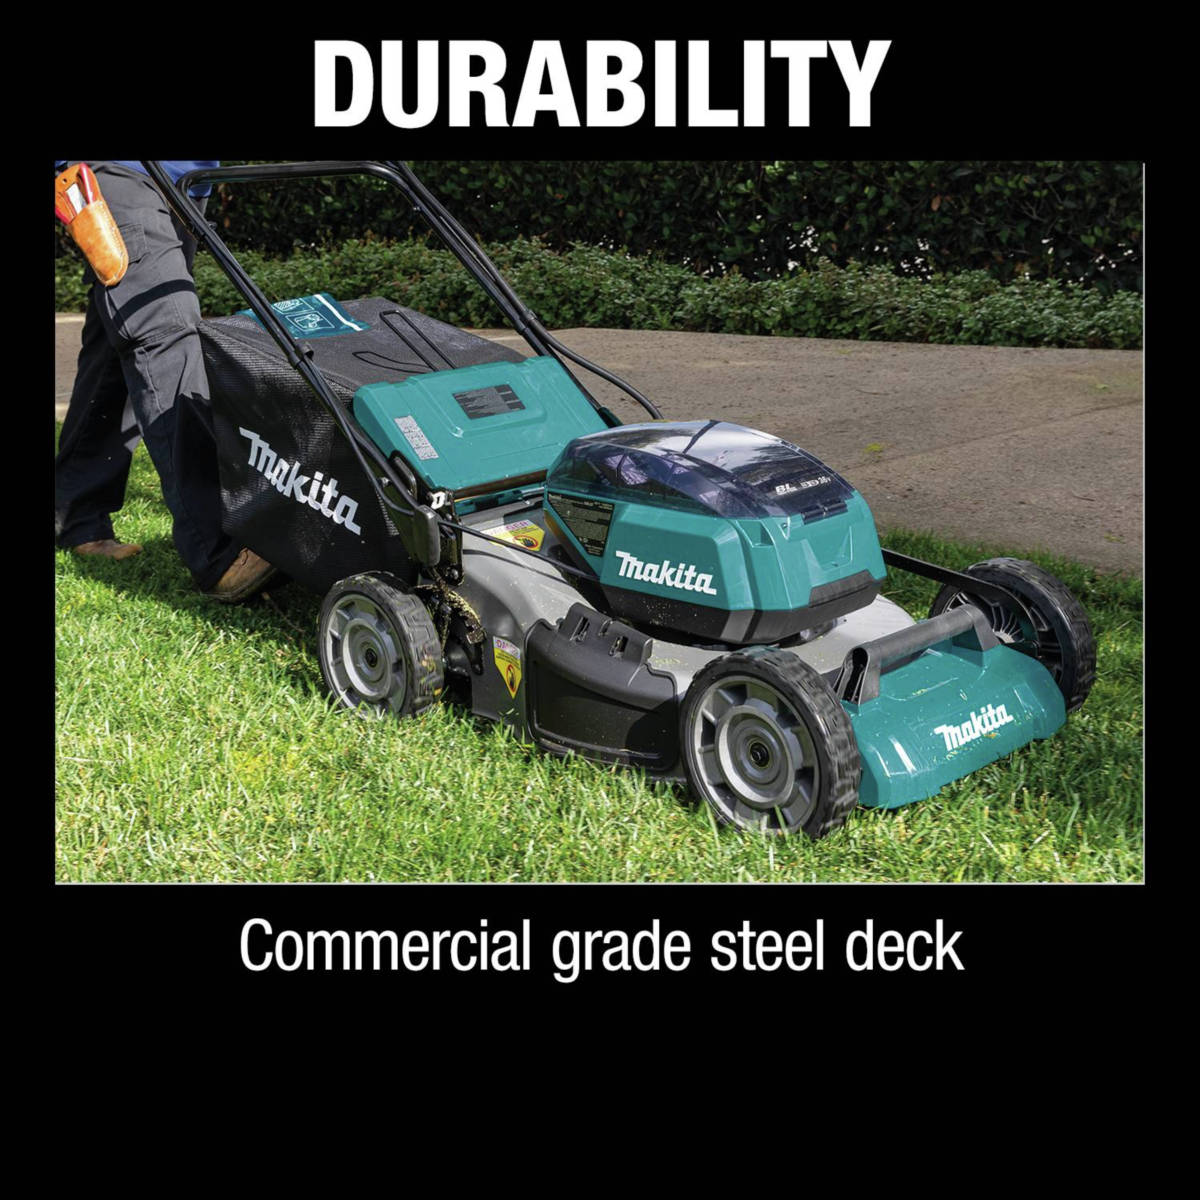 18V X2 (36V) LXT Lawn Mower features commercial grade steel deck